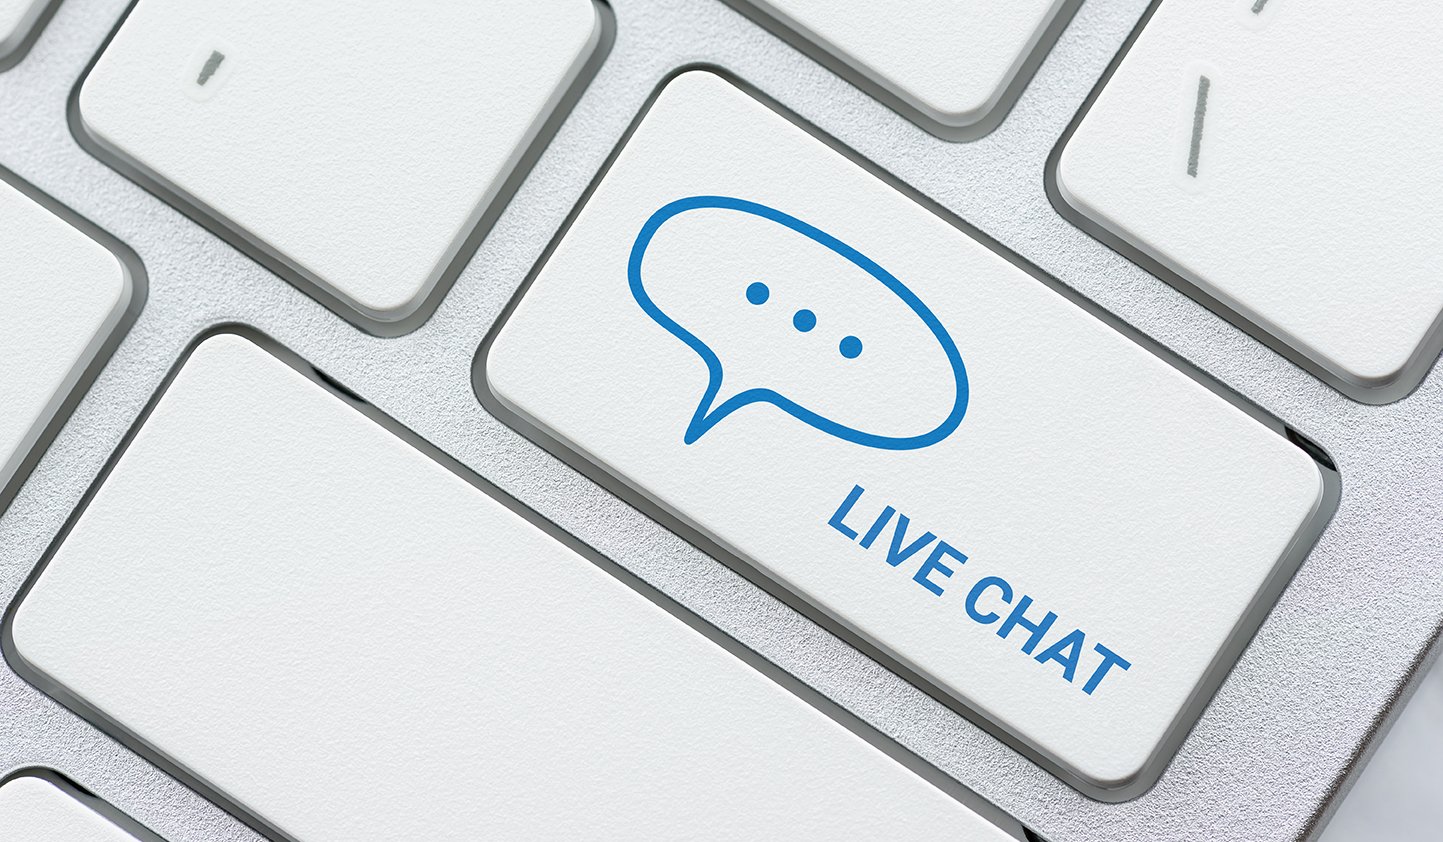 Live Chat Software